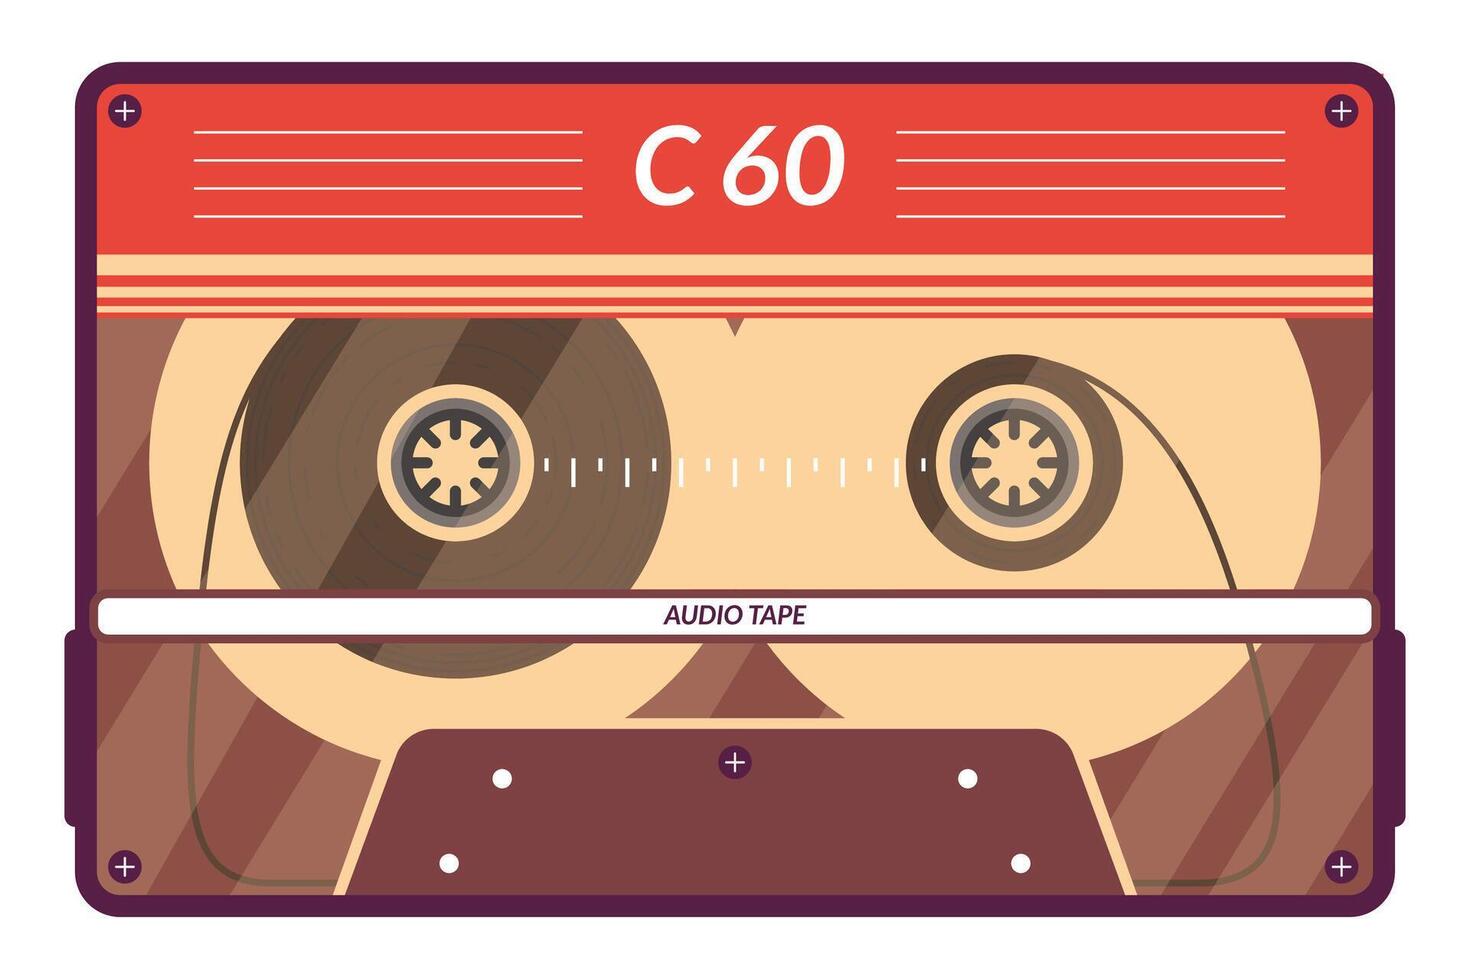 Vintage tape cassette. Retro mixtape, 1980s pop songs tapes and stereo music cassettes. 90s hifi disco dance audiocassette, analogue player record cassette. Isolated symbols vector